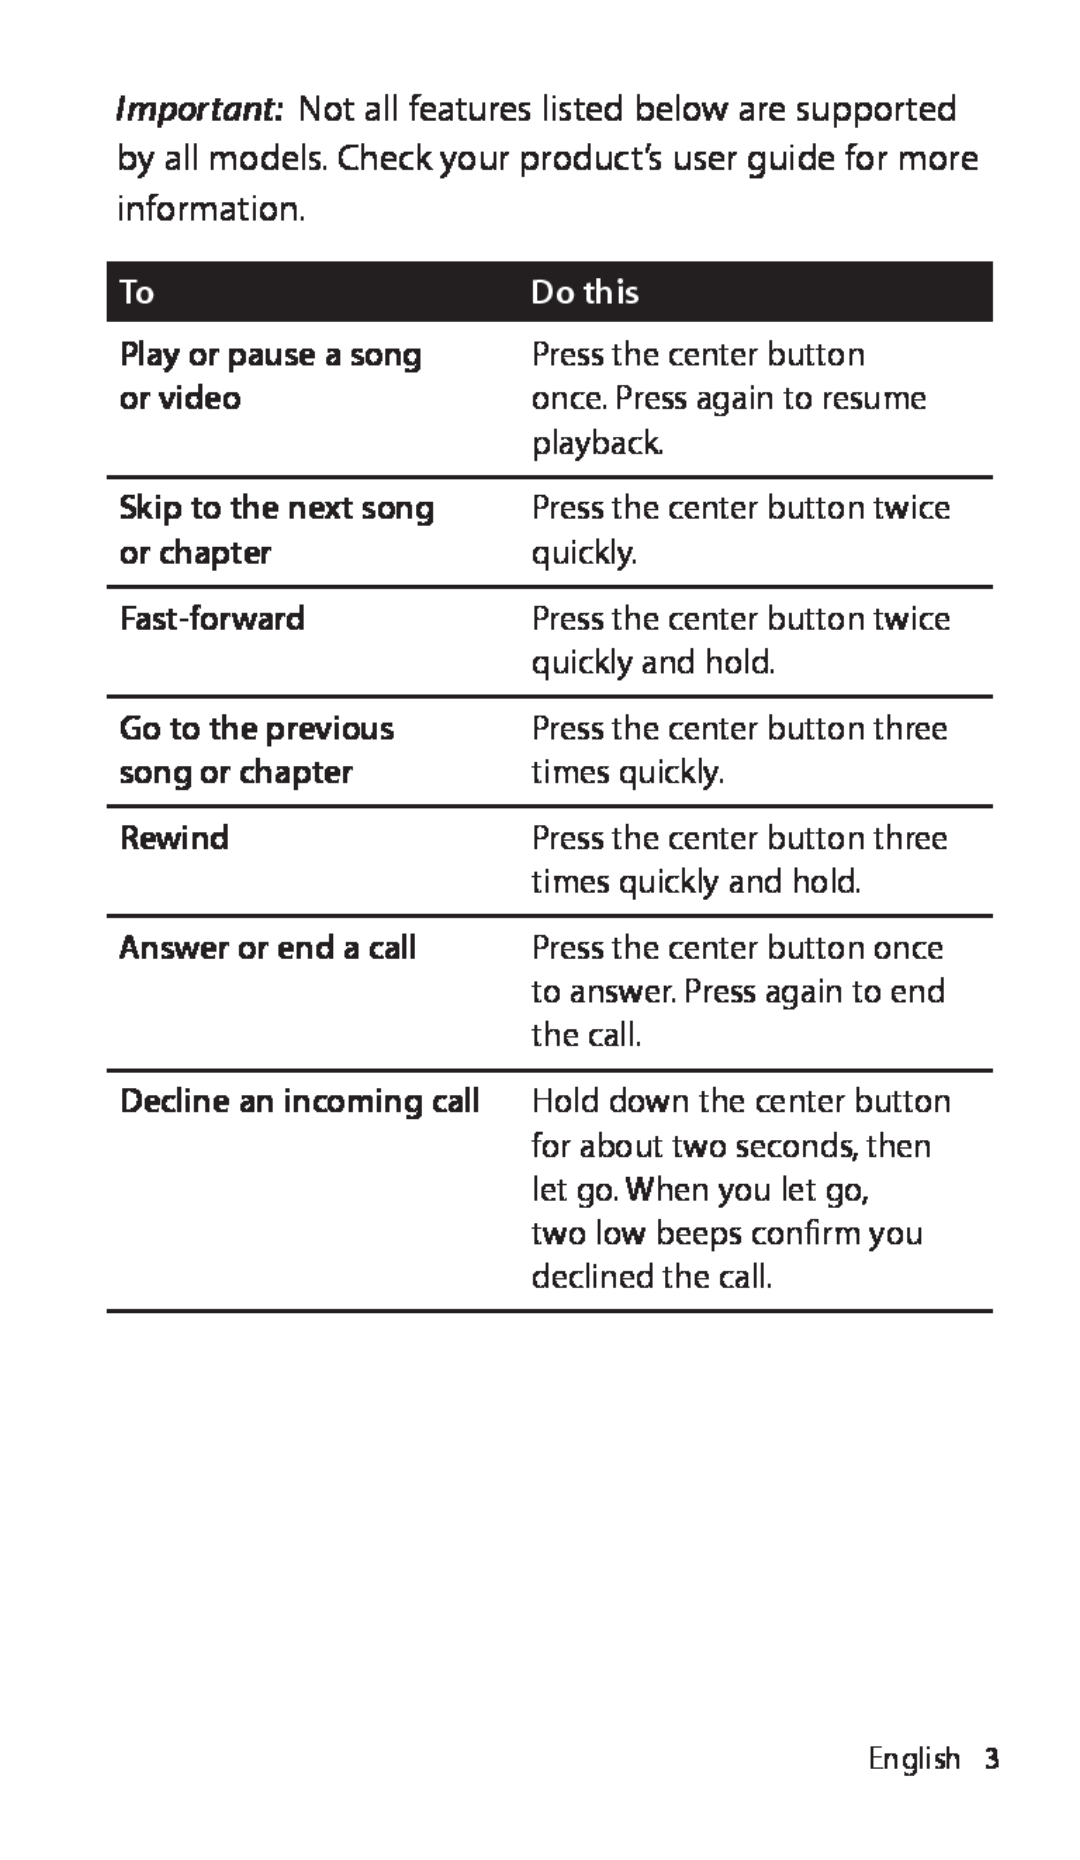 Apple ZM034-5431-A manual Play or pause a song or video, Do this, Skip to the next song, or chapter, Fast-forward, Rewind 